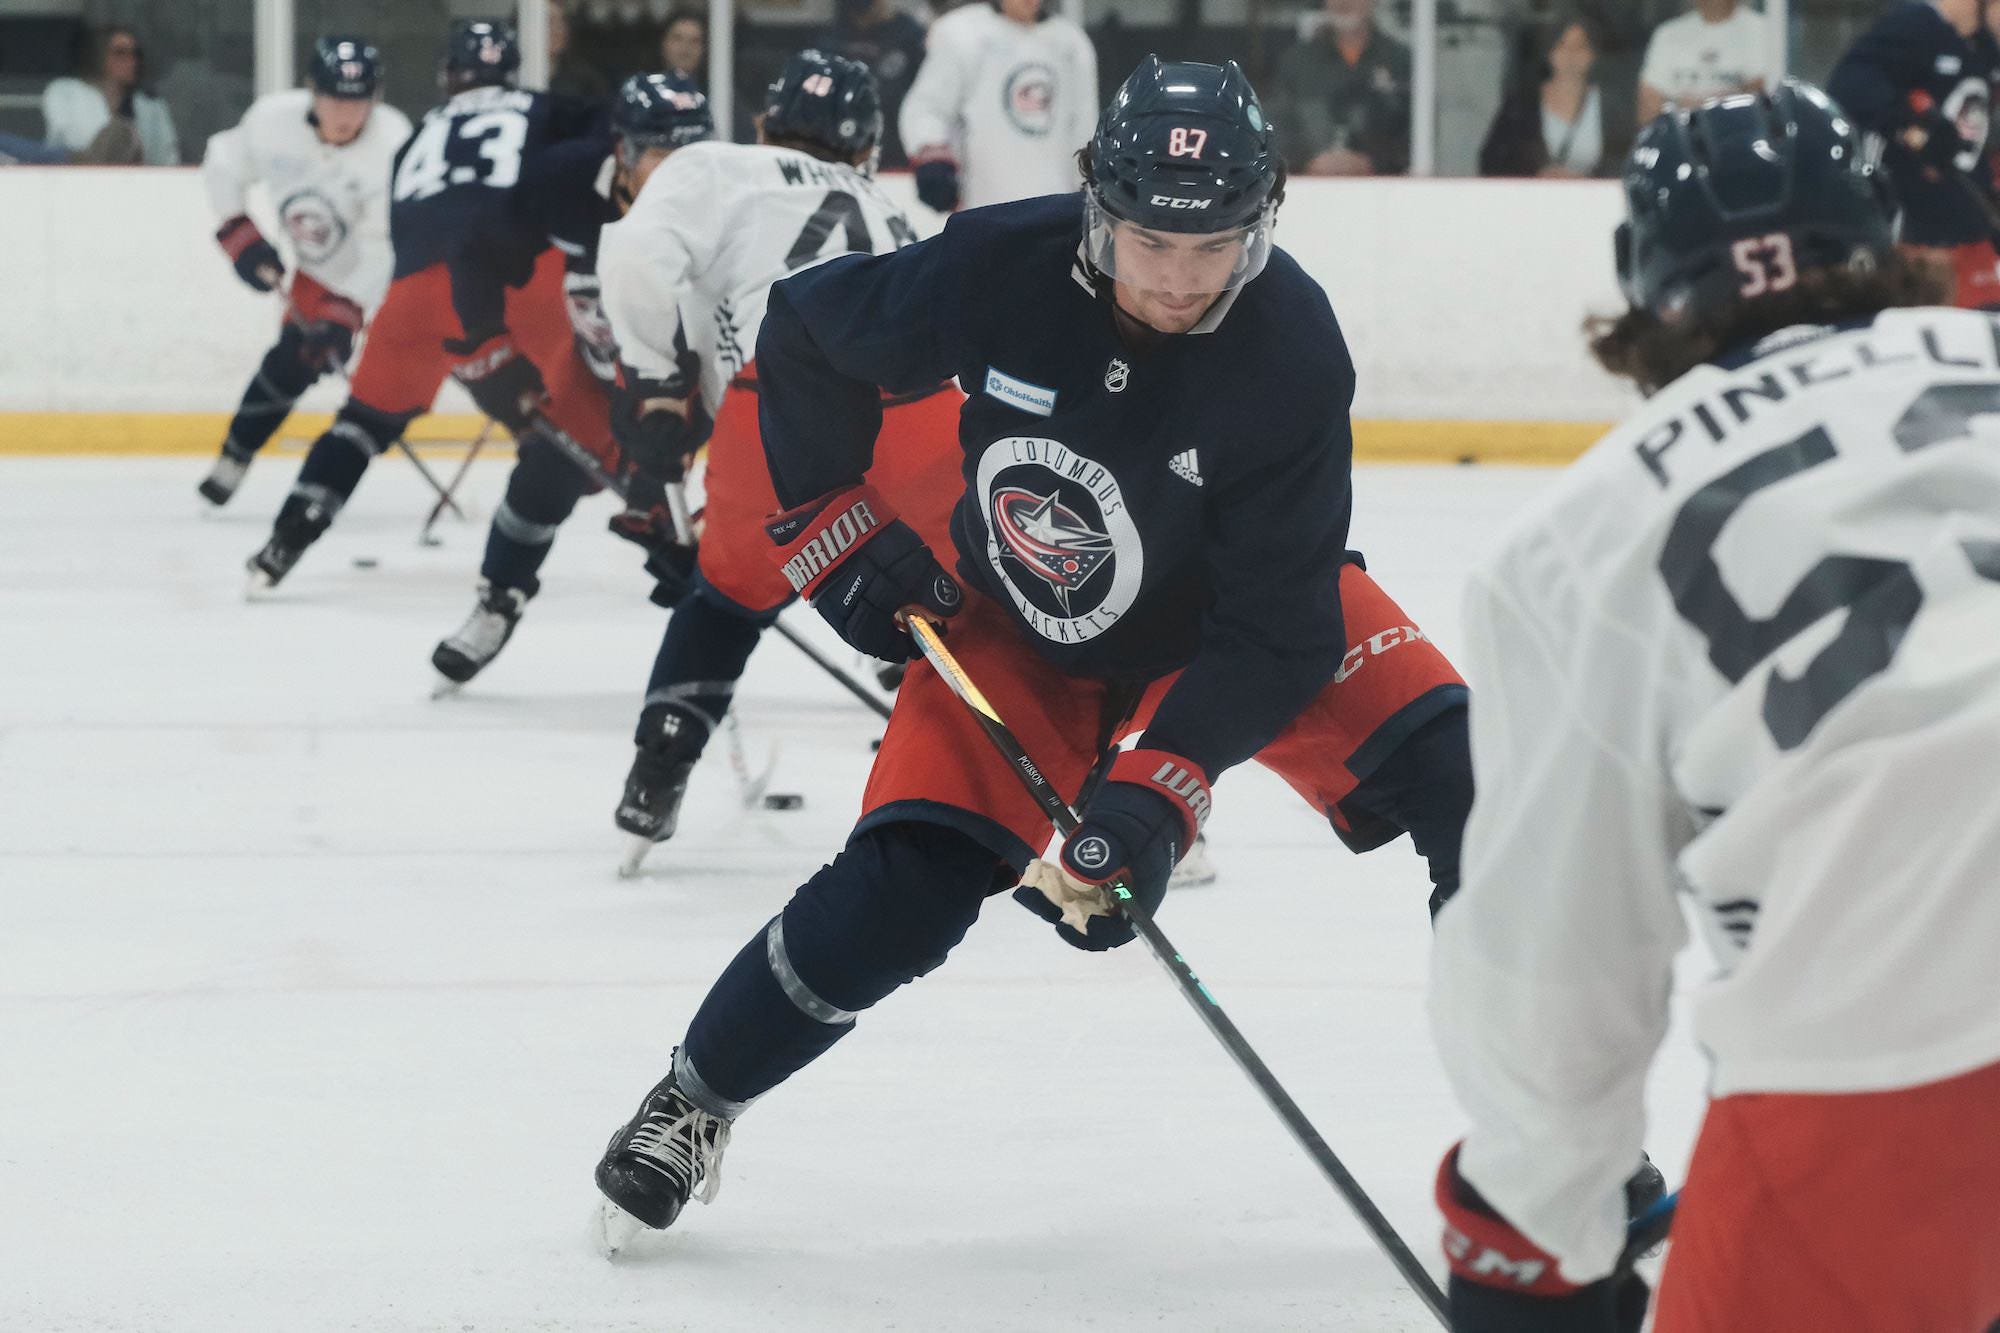 Exclusive Photos from CBJ Development Camp by Andy Newman